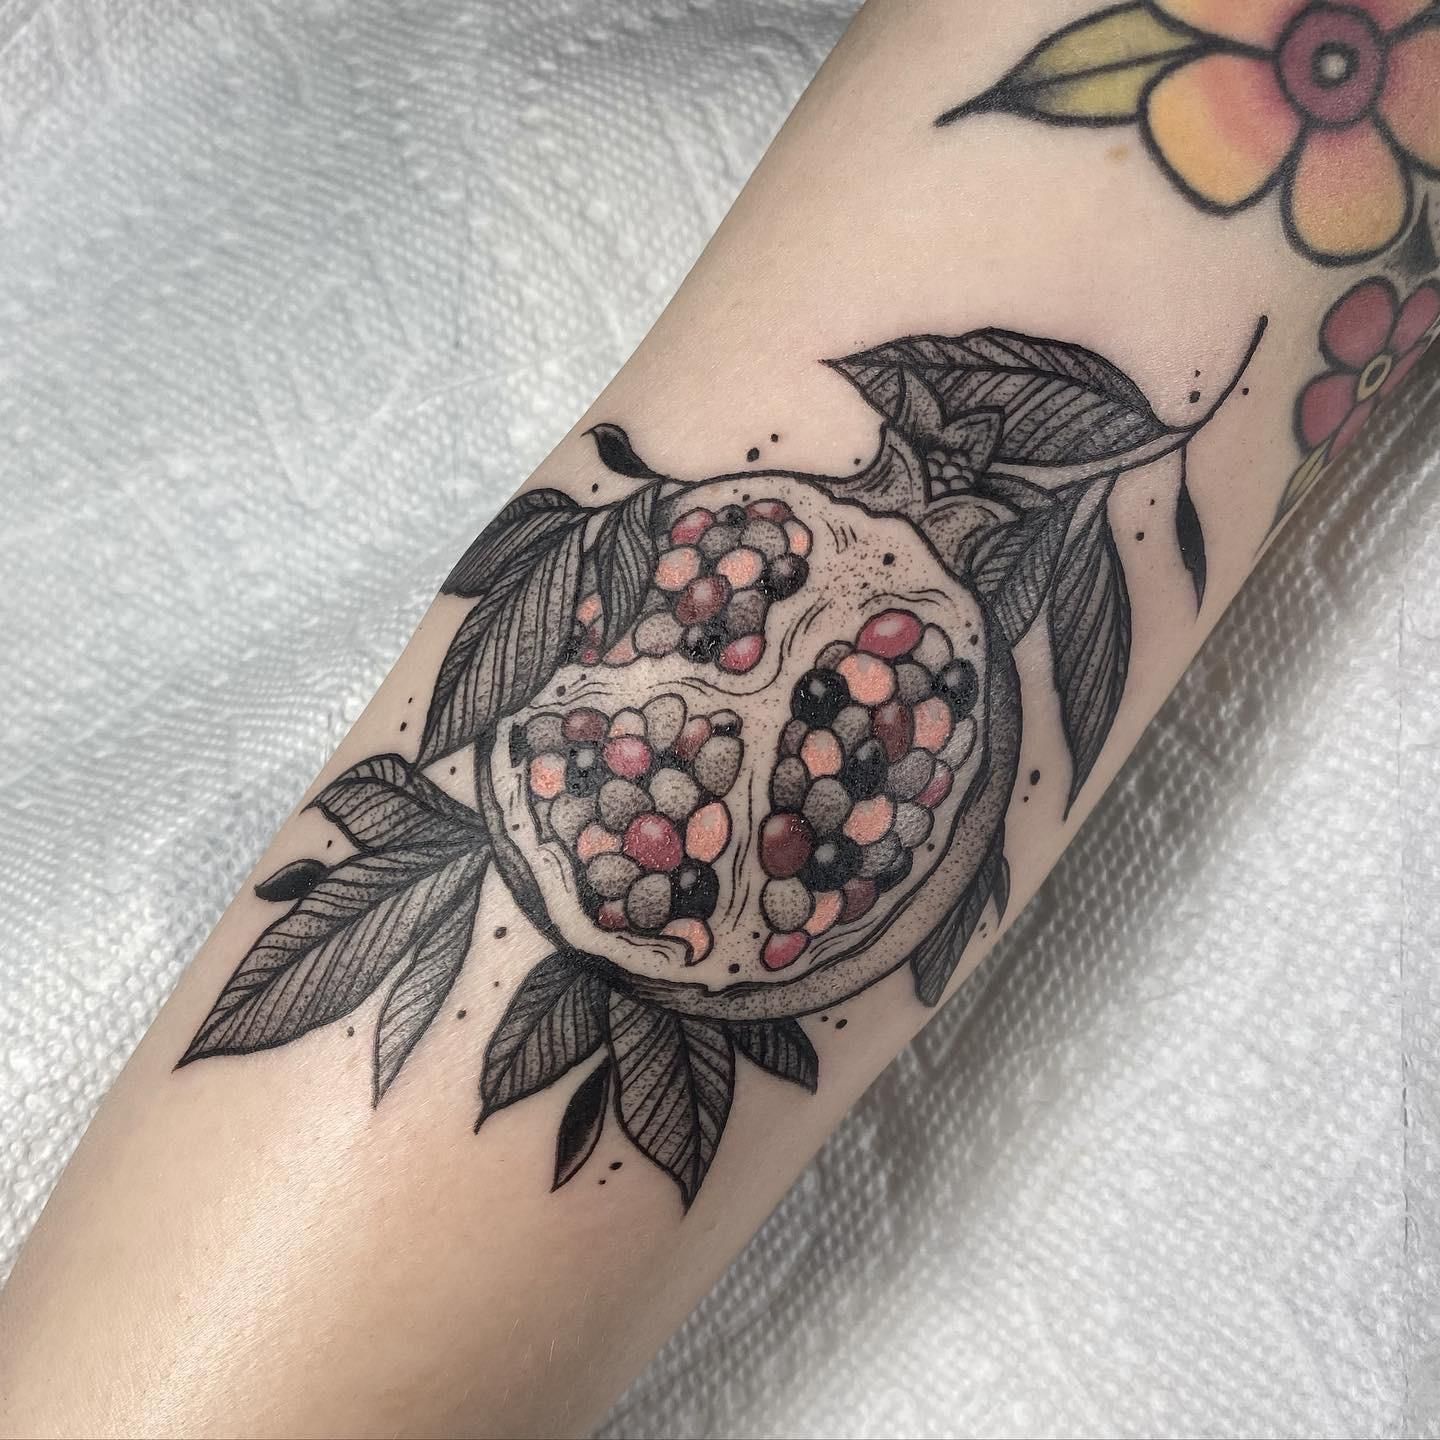 Pomegranate Tattoo Meaning: The Stories Behind Meaningful Tattoo Choices